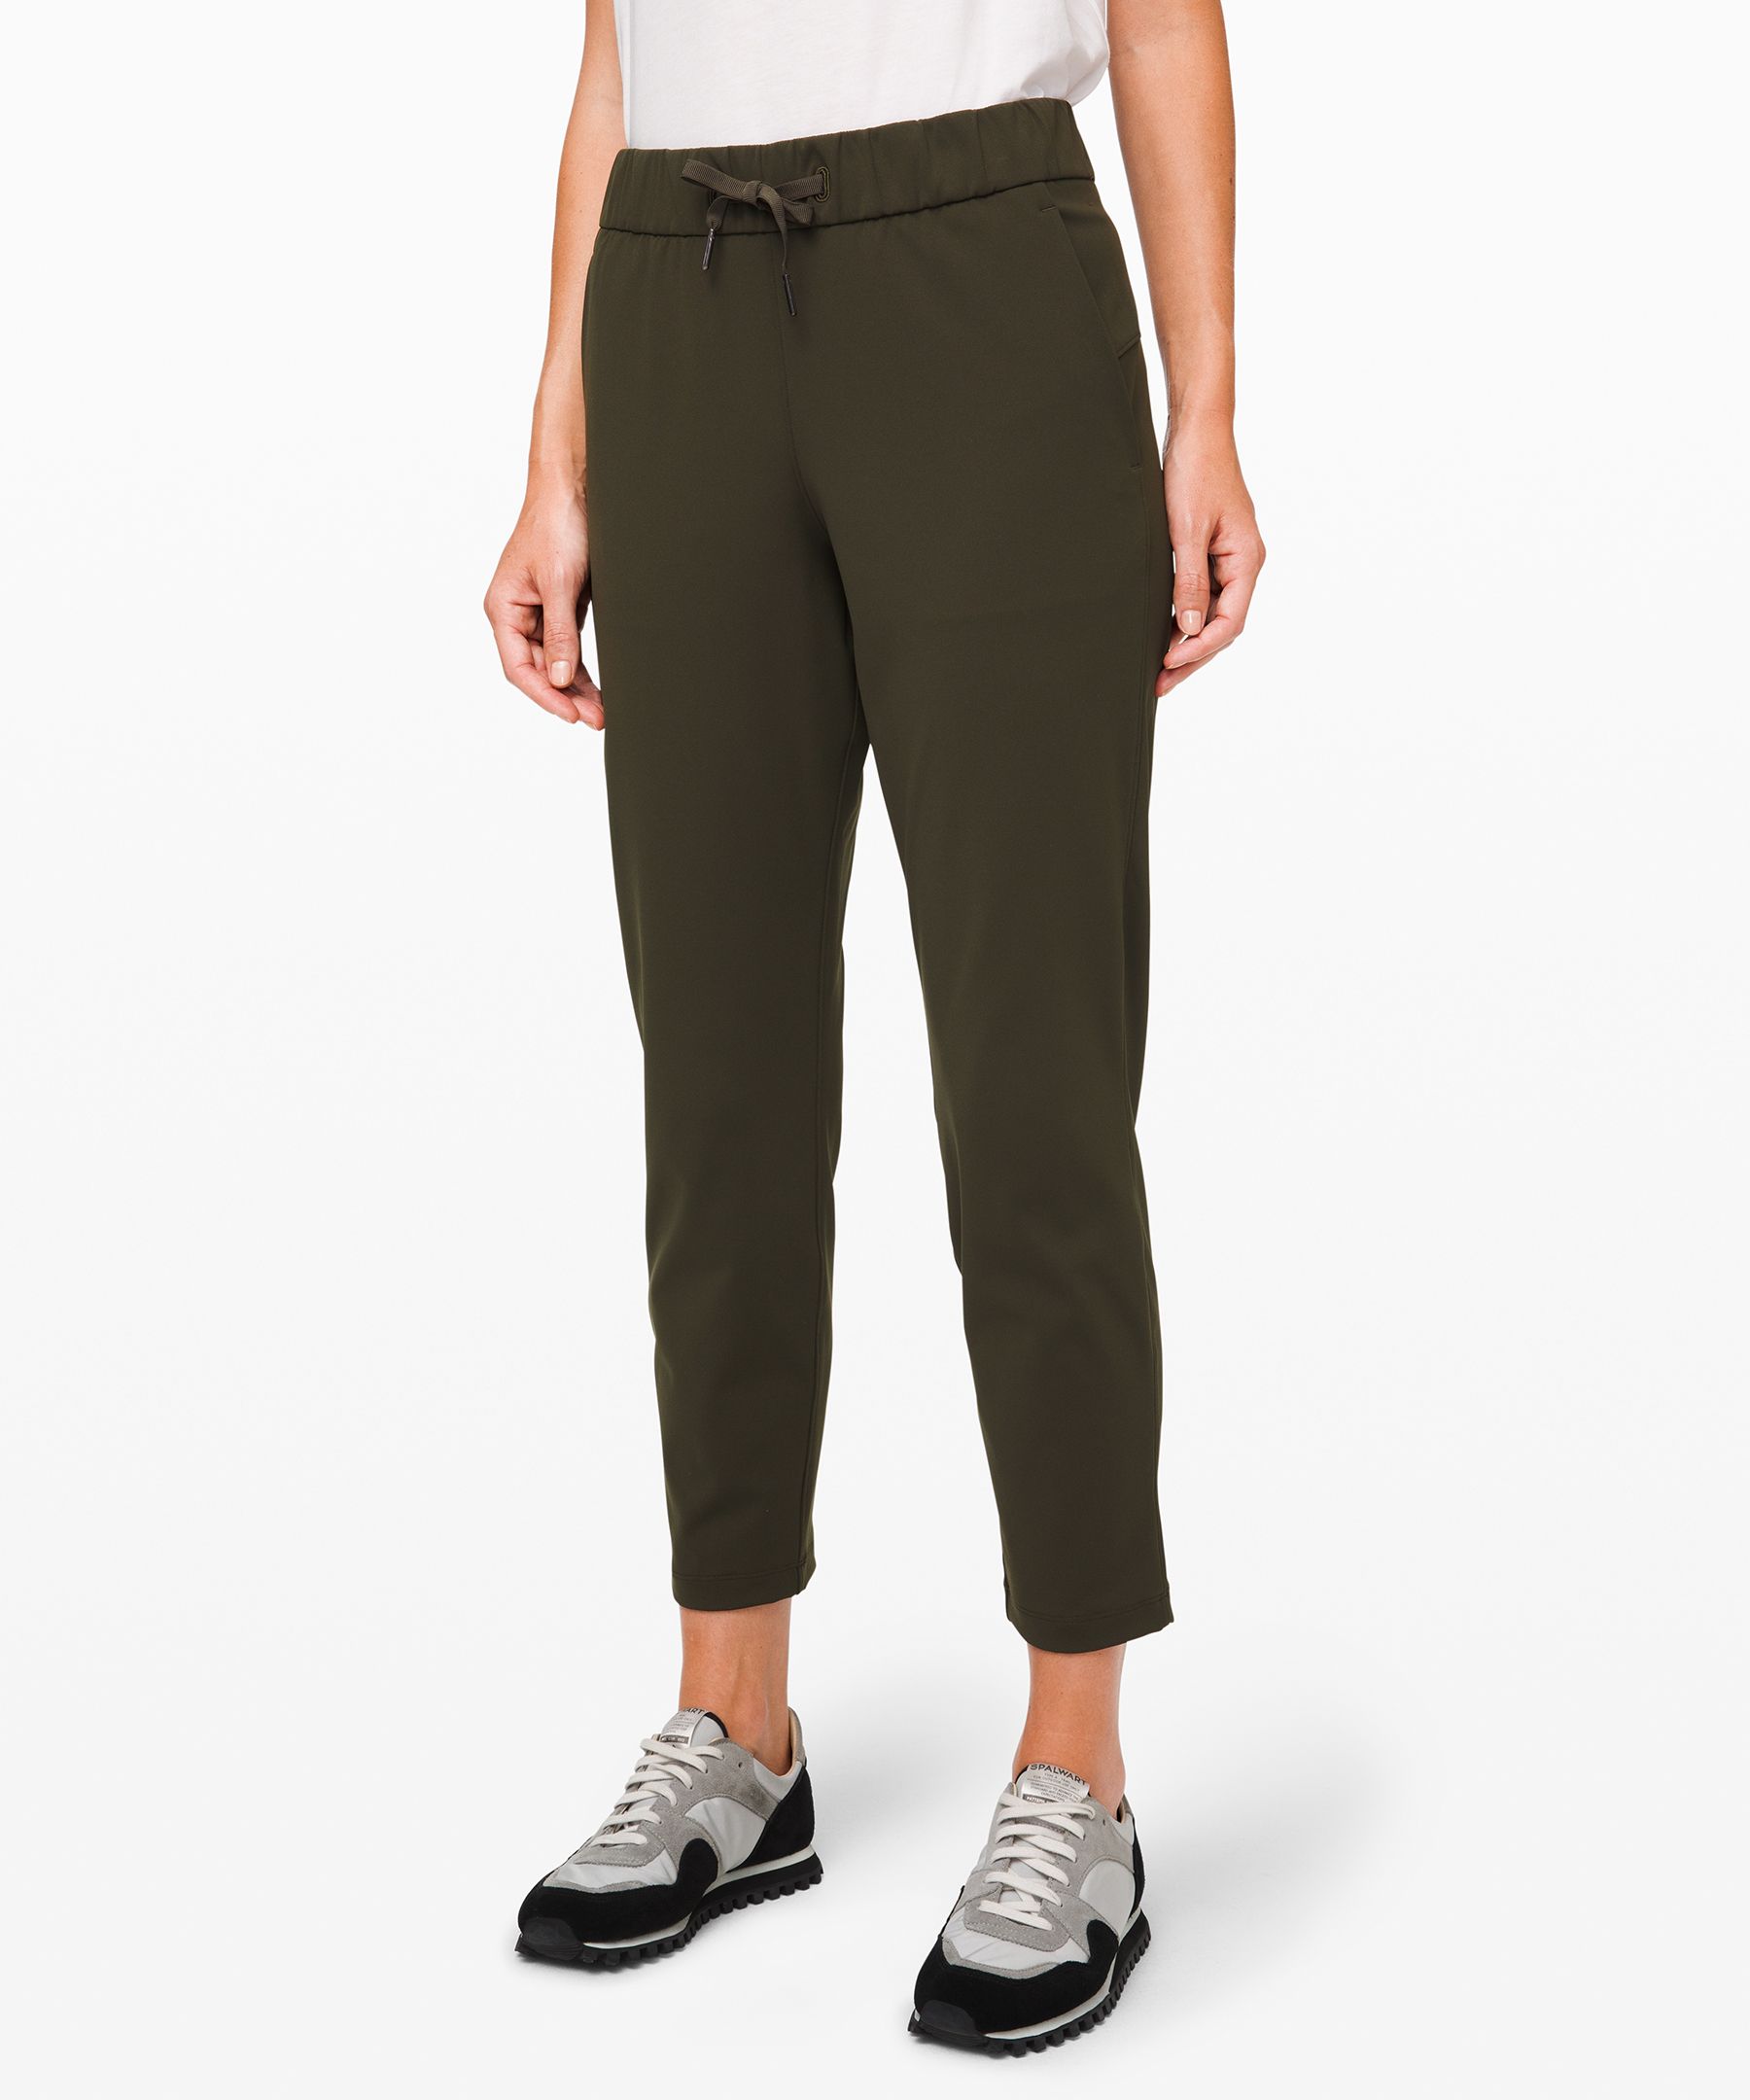 Lululemon On The Fly Pants Reviewed